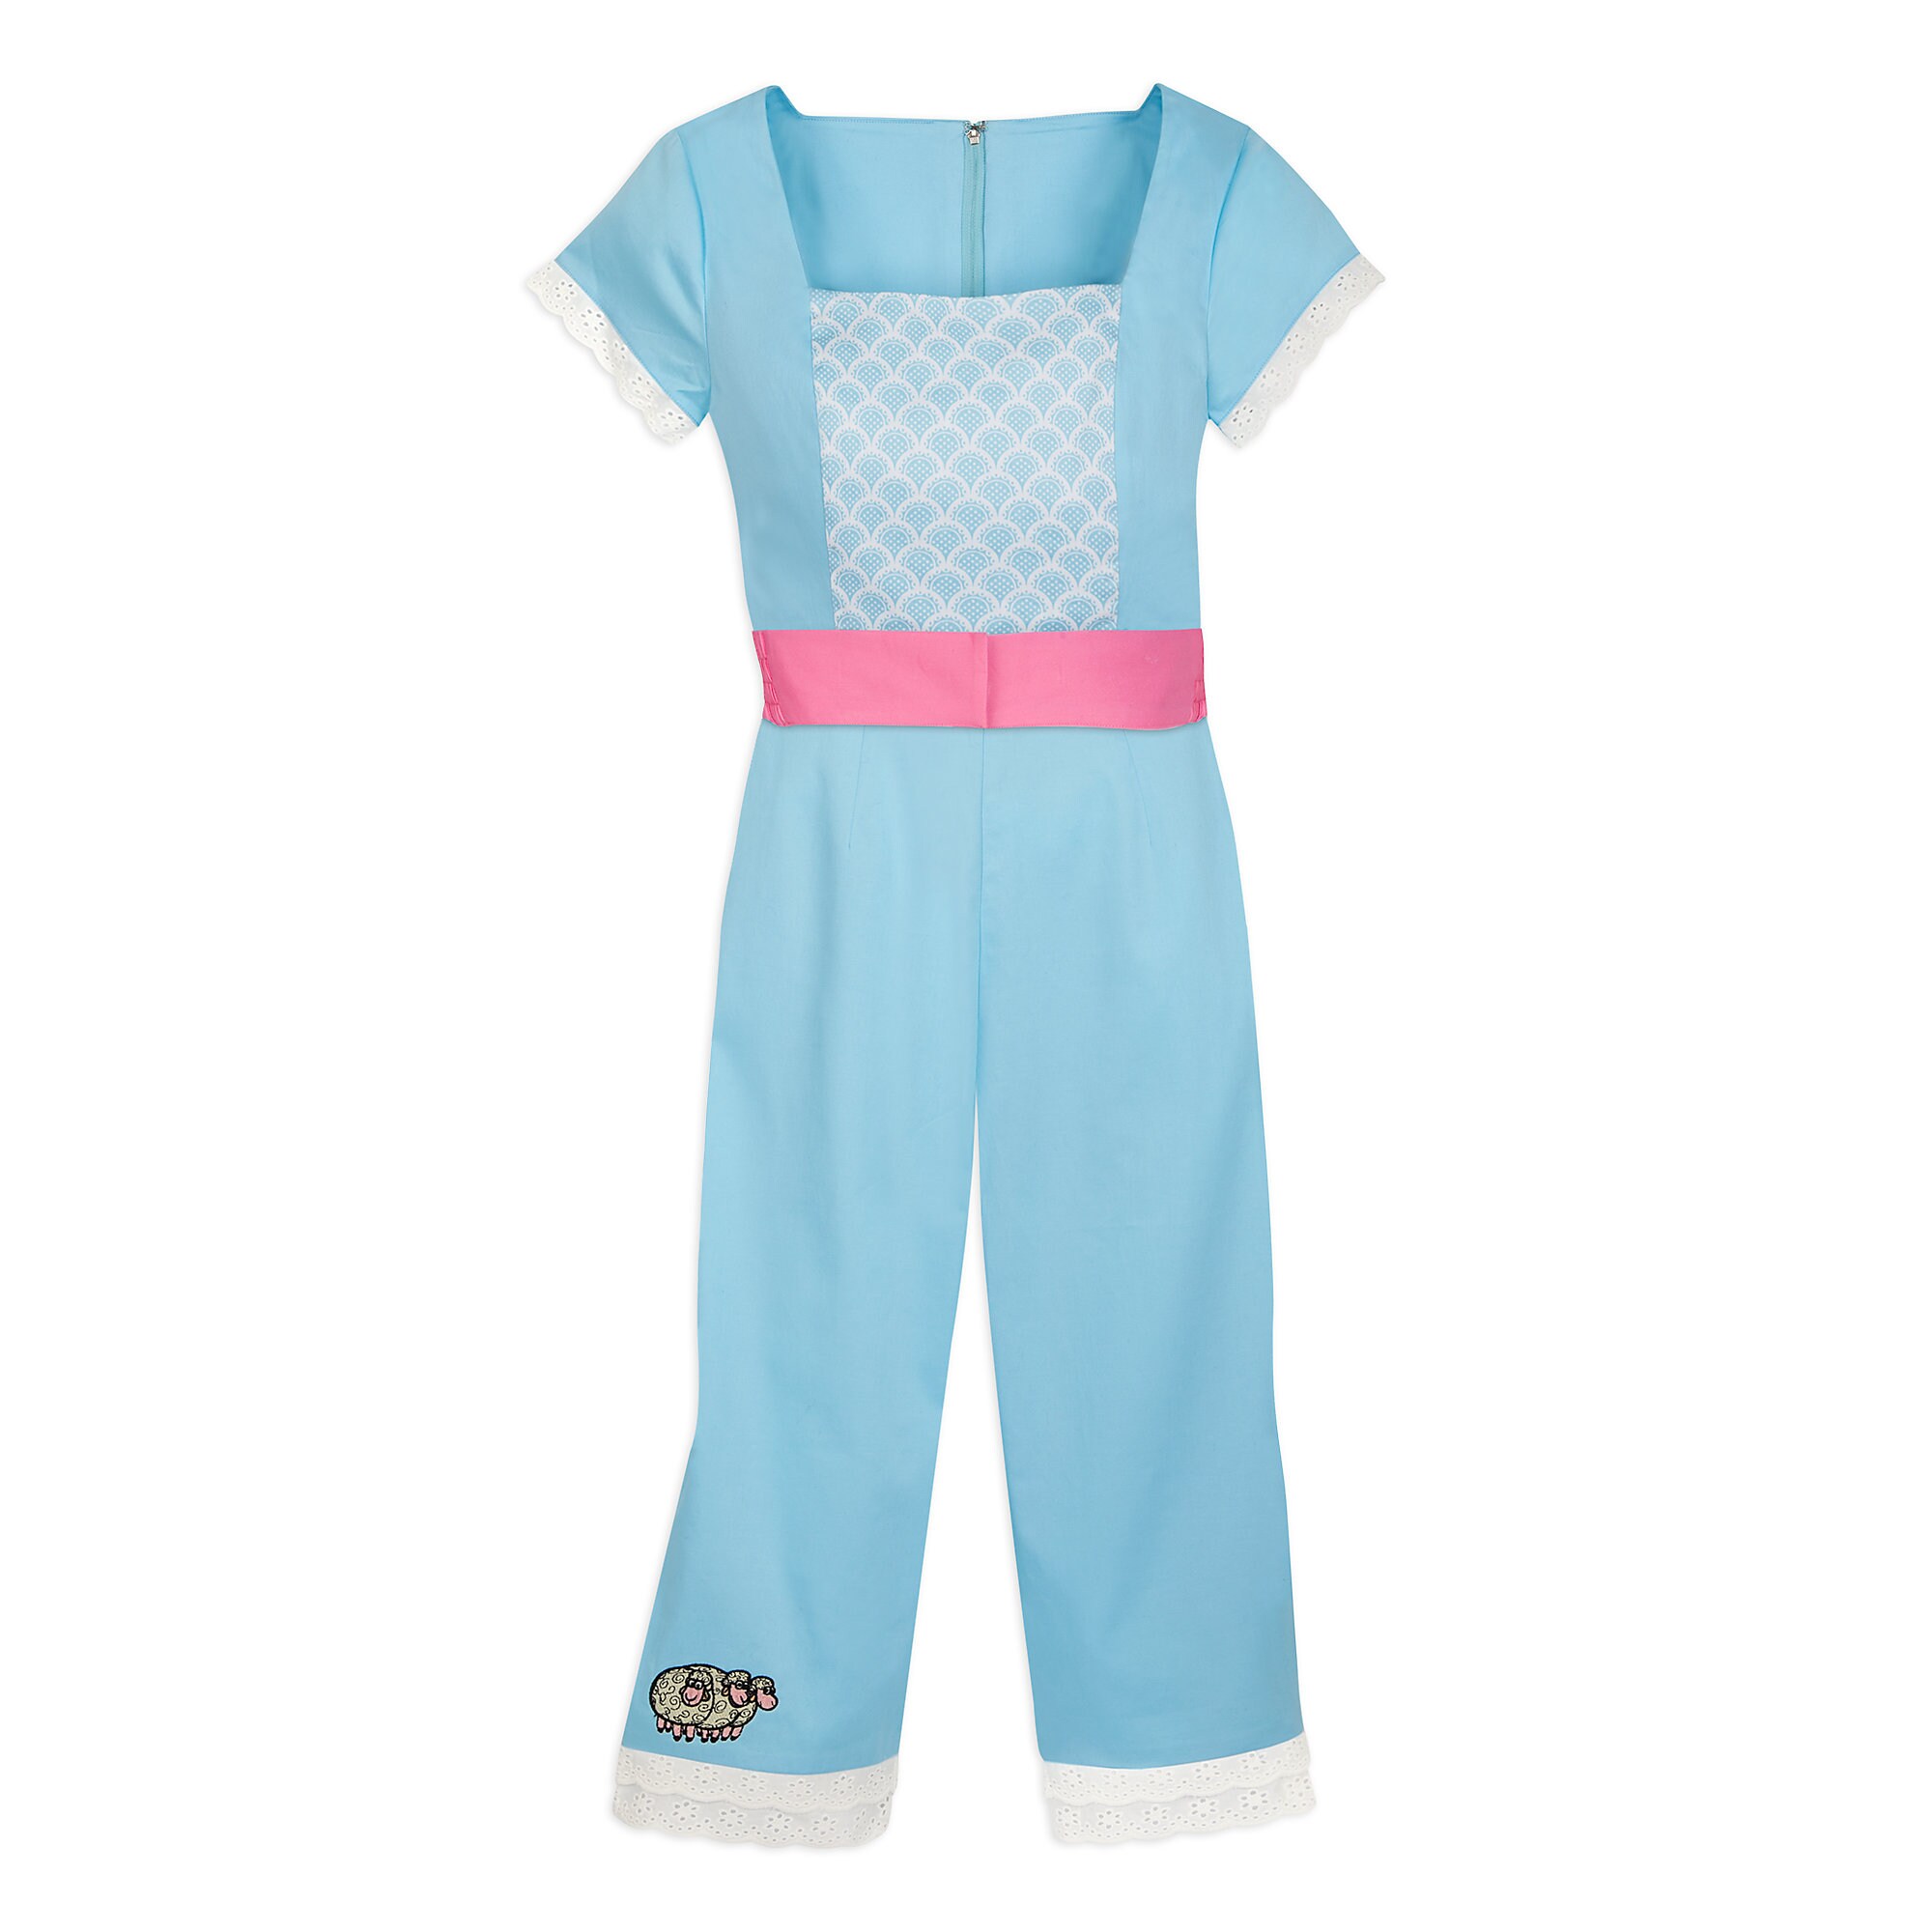 Bo Peep Jumpsuit and Convertible Skirt for Women - Toy Story 4